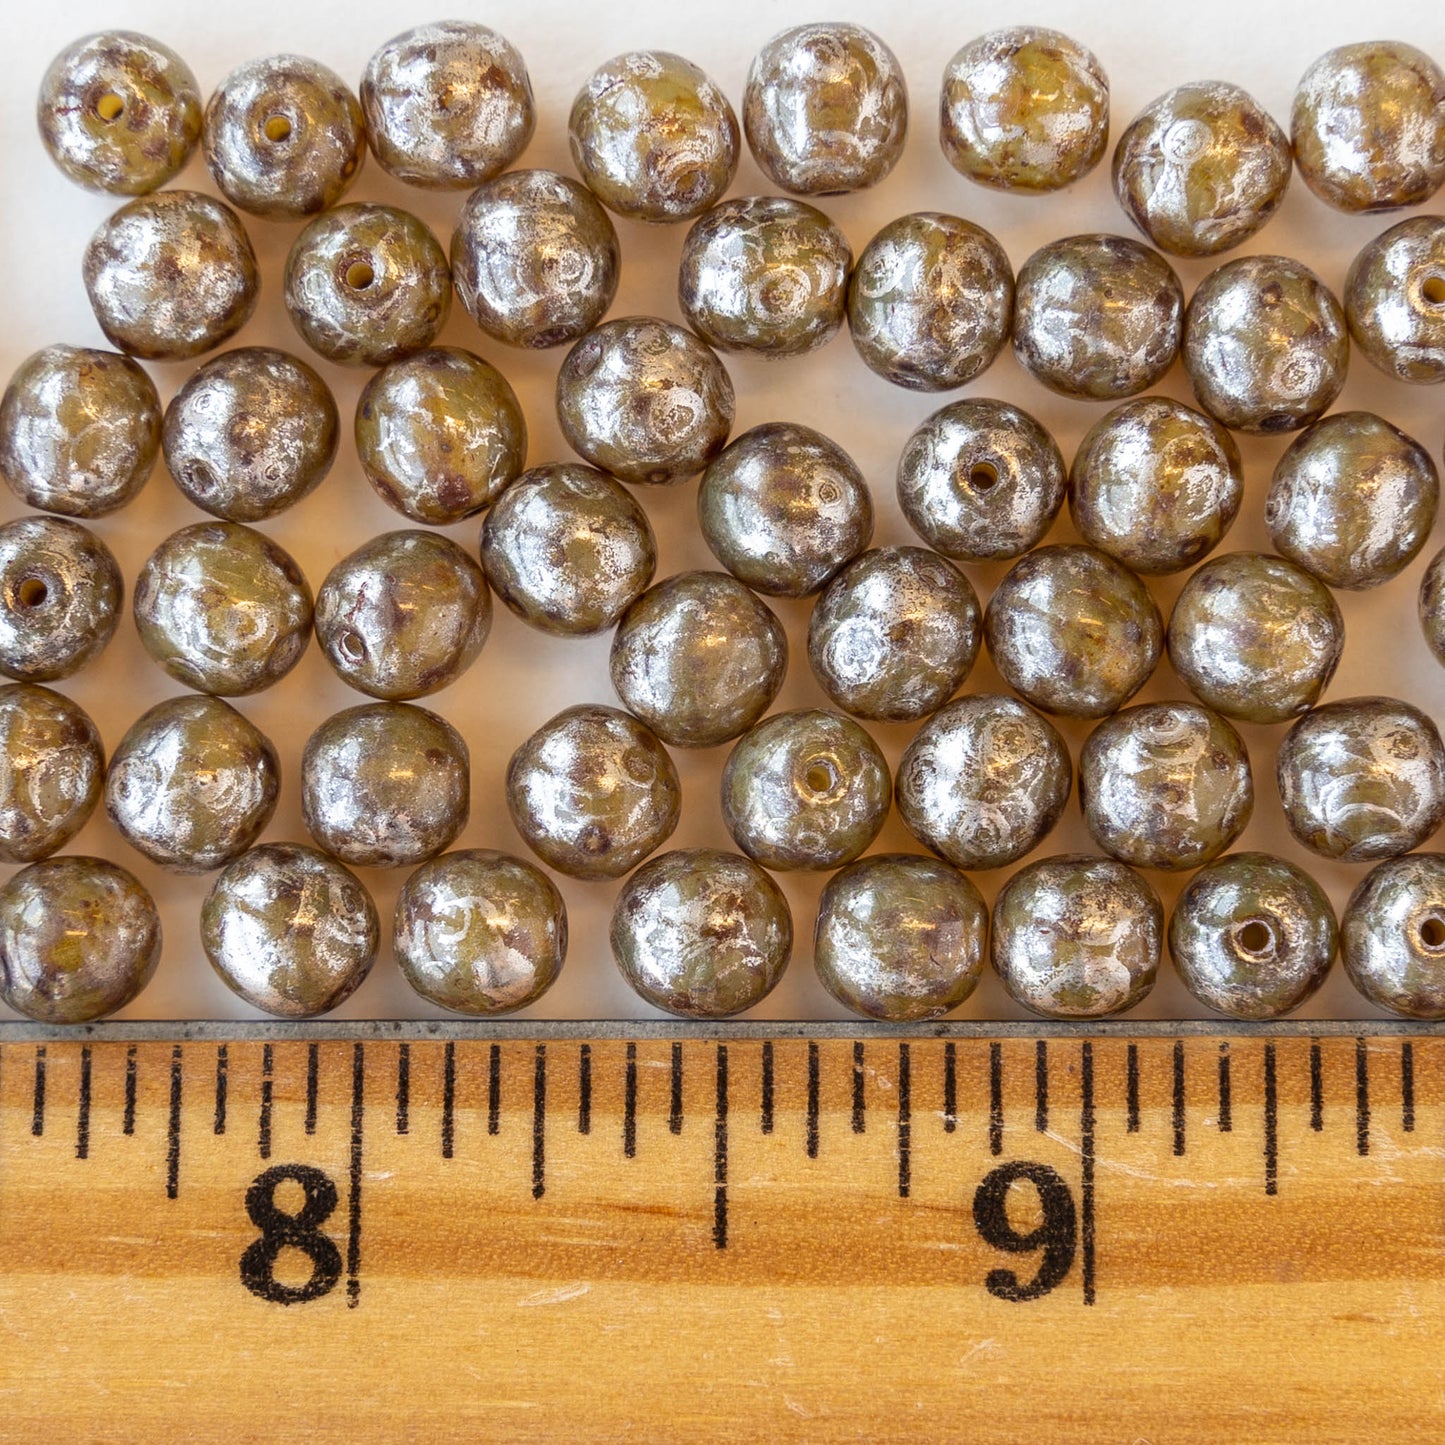 6mm Round Glass Beads - Amber Topaz with a Silvery Finish - 50 beads